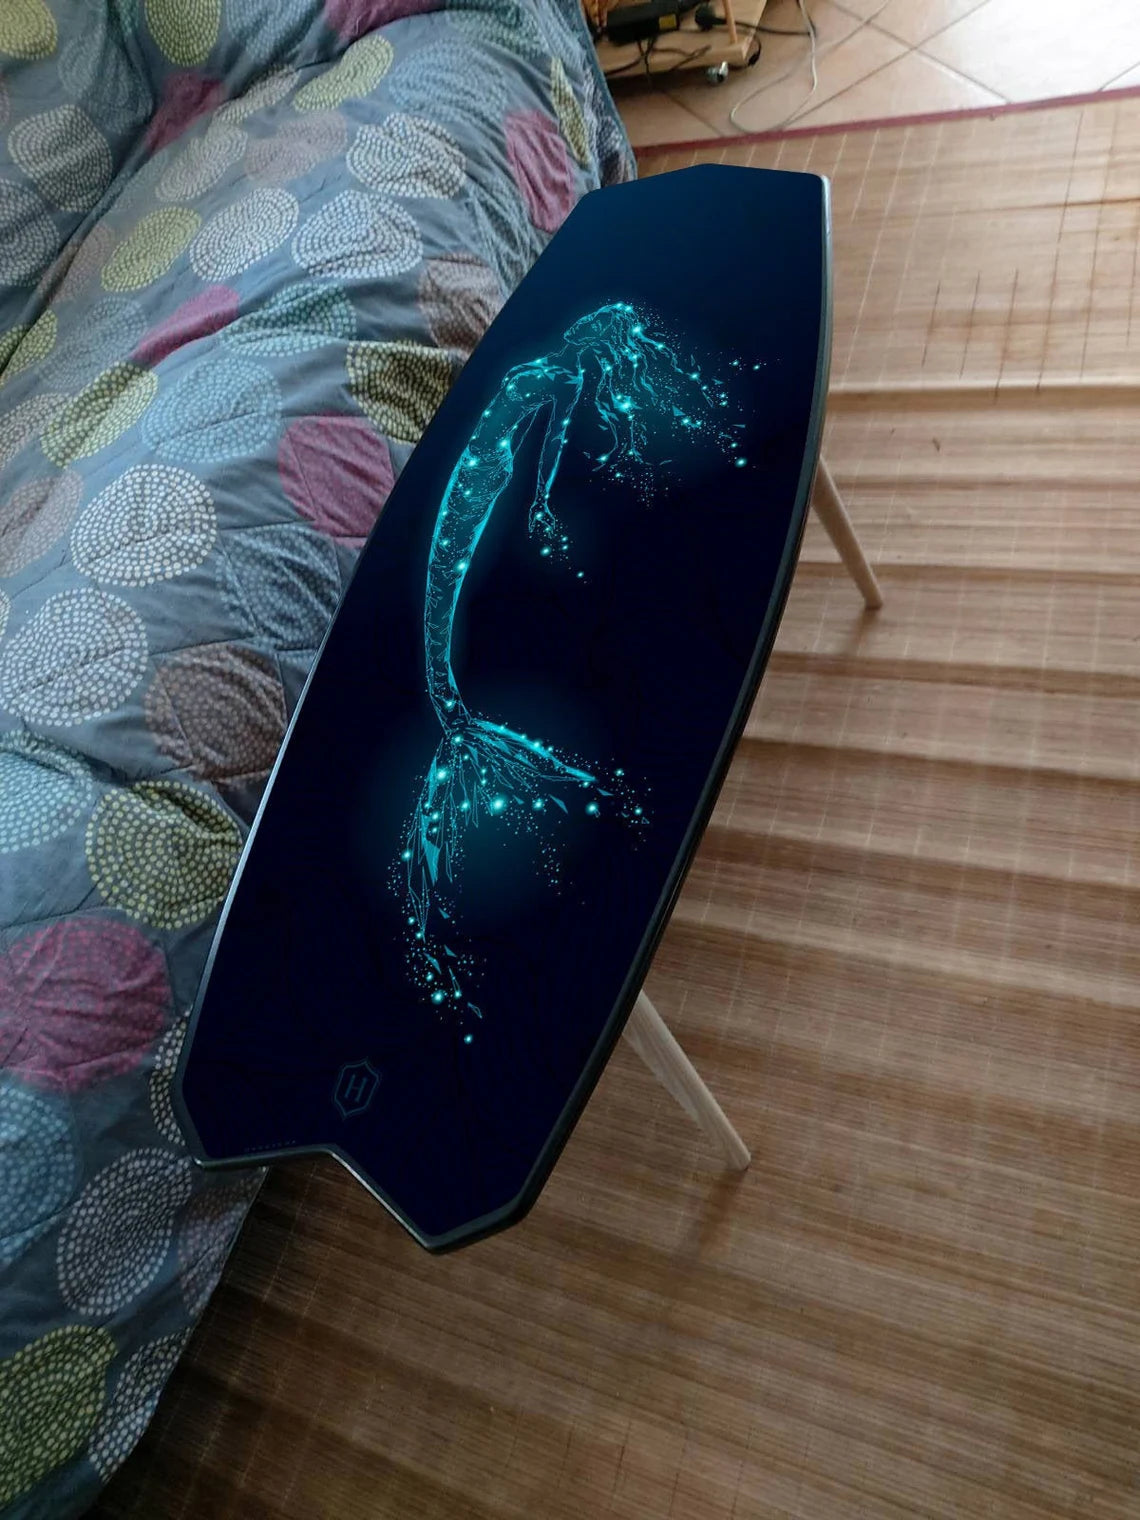 Fish Surfboard Inspired Wooden Surf Table with Mermaid Pattern